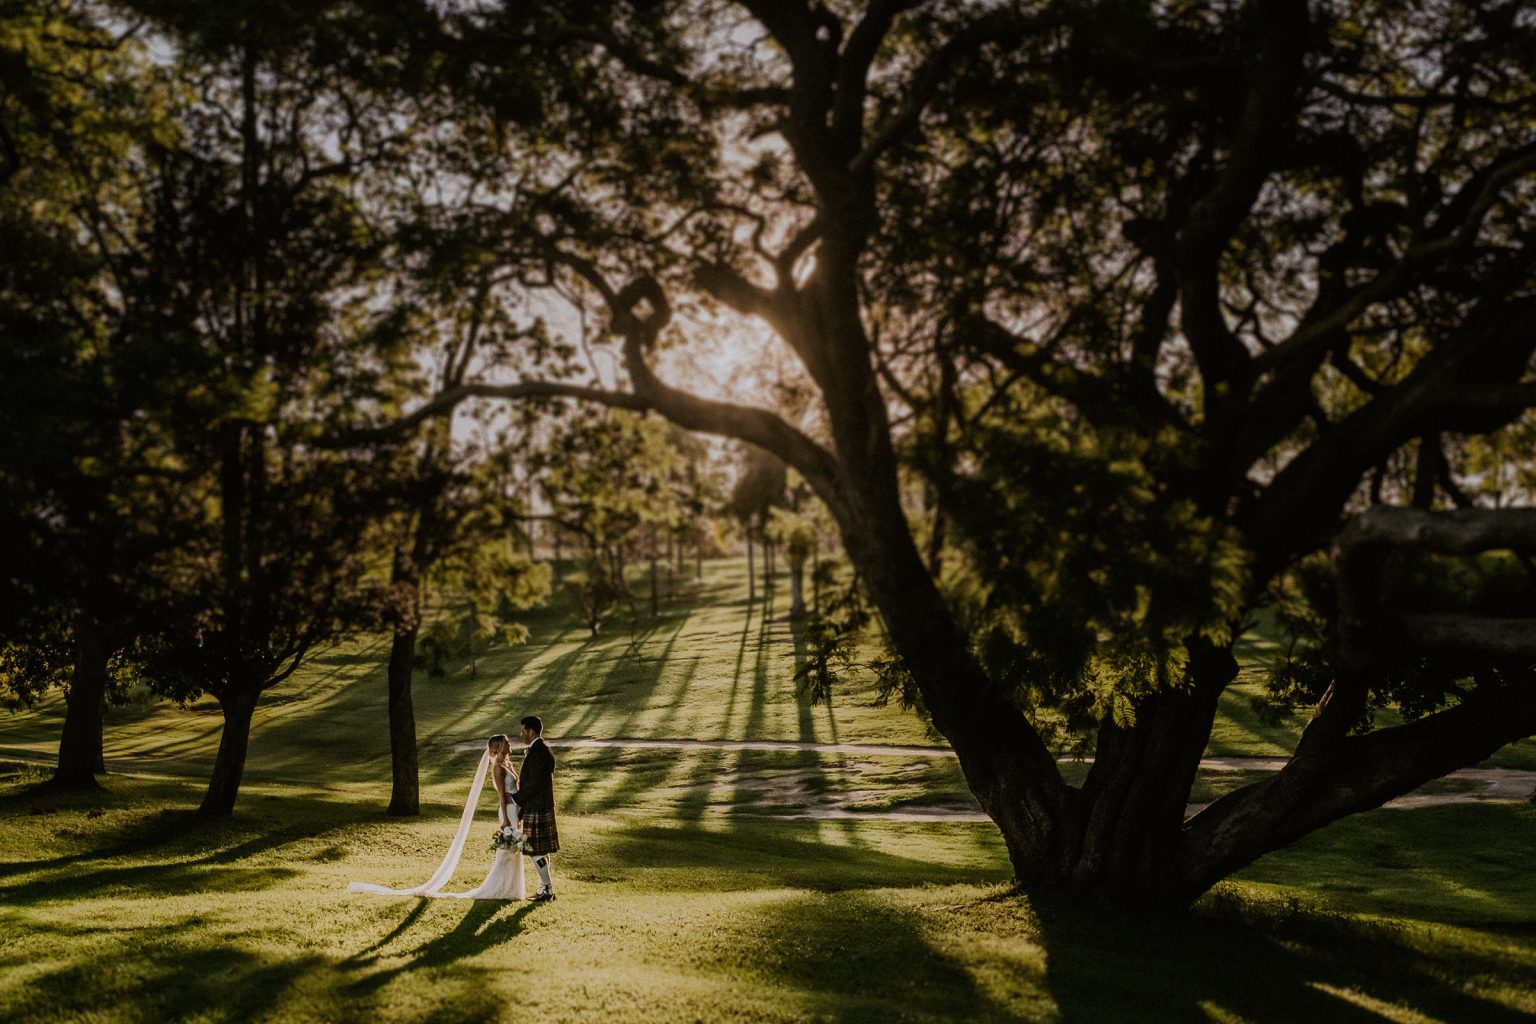 Sunset wedding at Victoria Park in Brisbane. Bride and groom standing under a a large jacaranda tree with rays of light coming through the trees